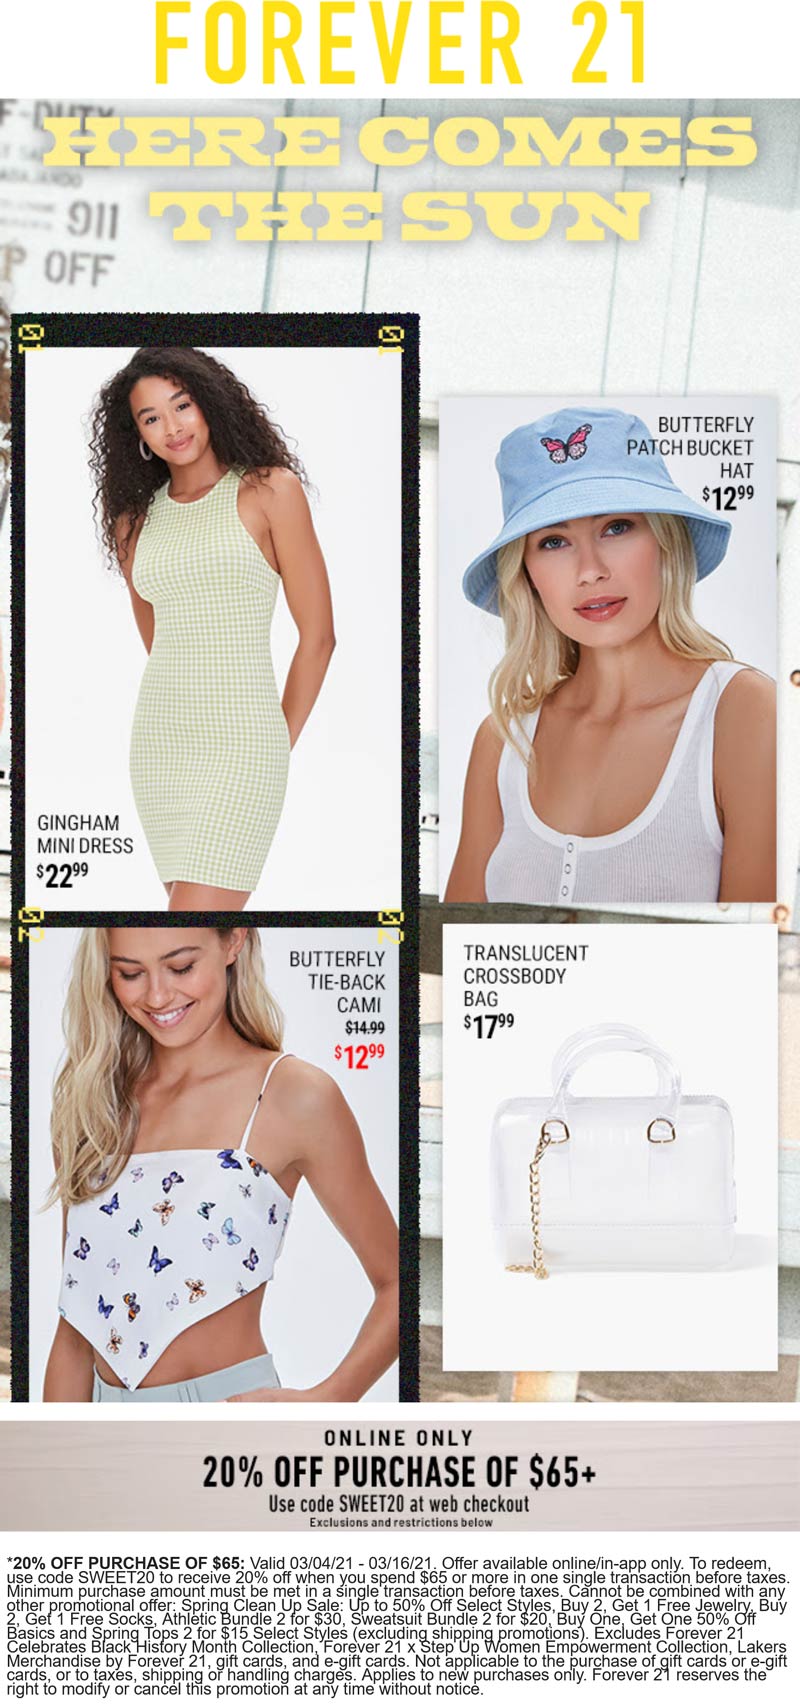 Forever 21 stores Coupon  20% off $65 online at Forever 21 via promo code SWEET20 #forever21 